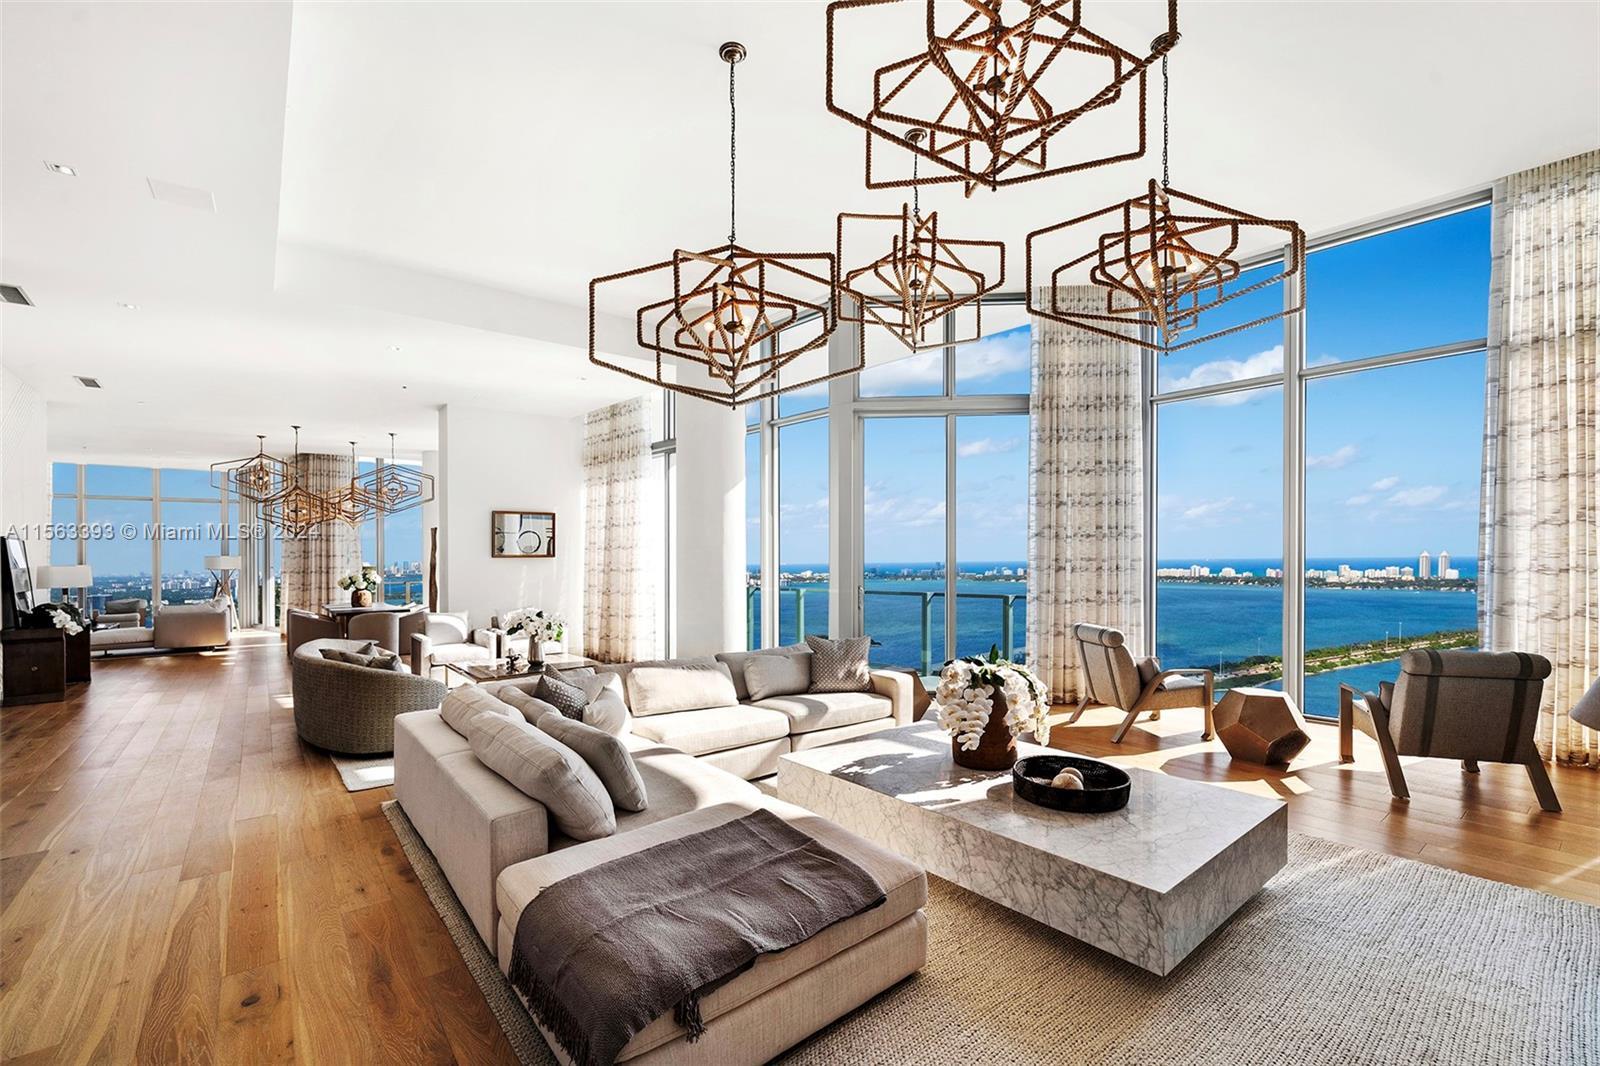 A true penthouse in every sense with 15ft ceilings, a private rooftop pool and nearly 8,000sf interi